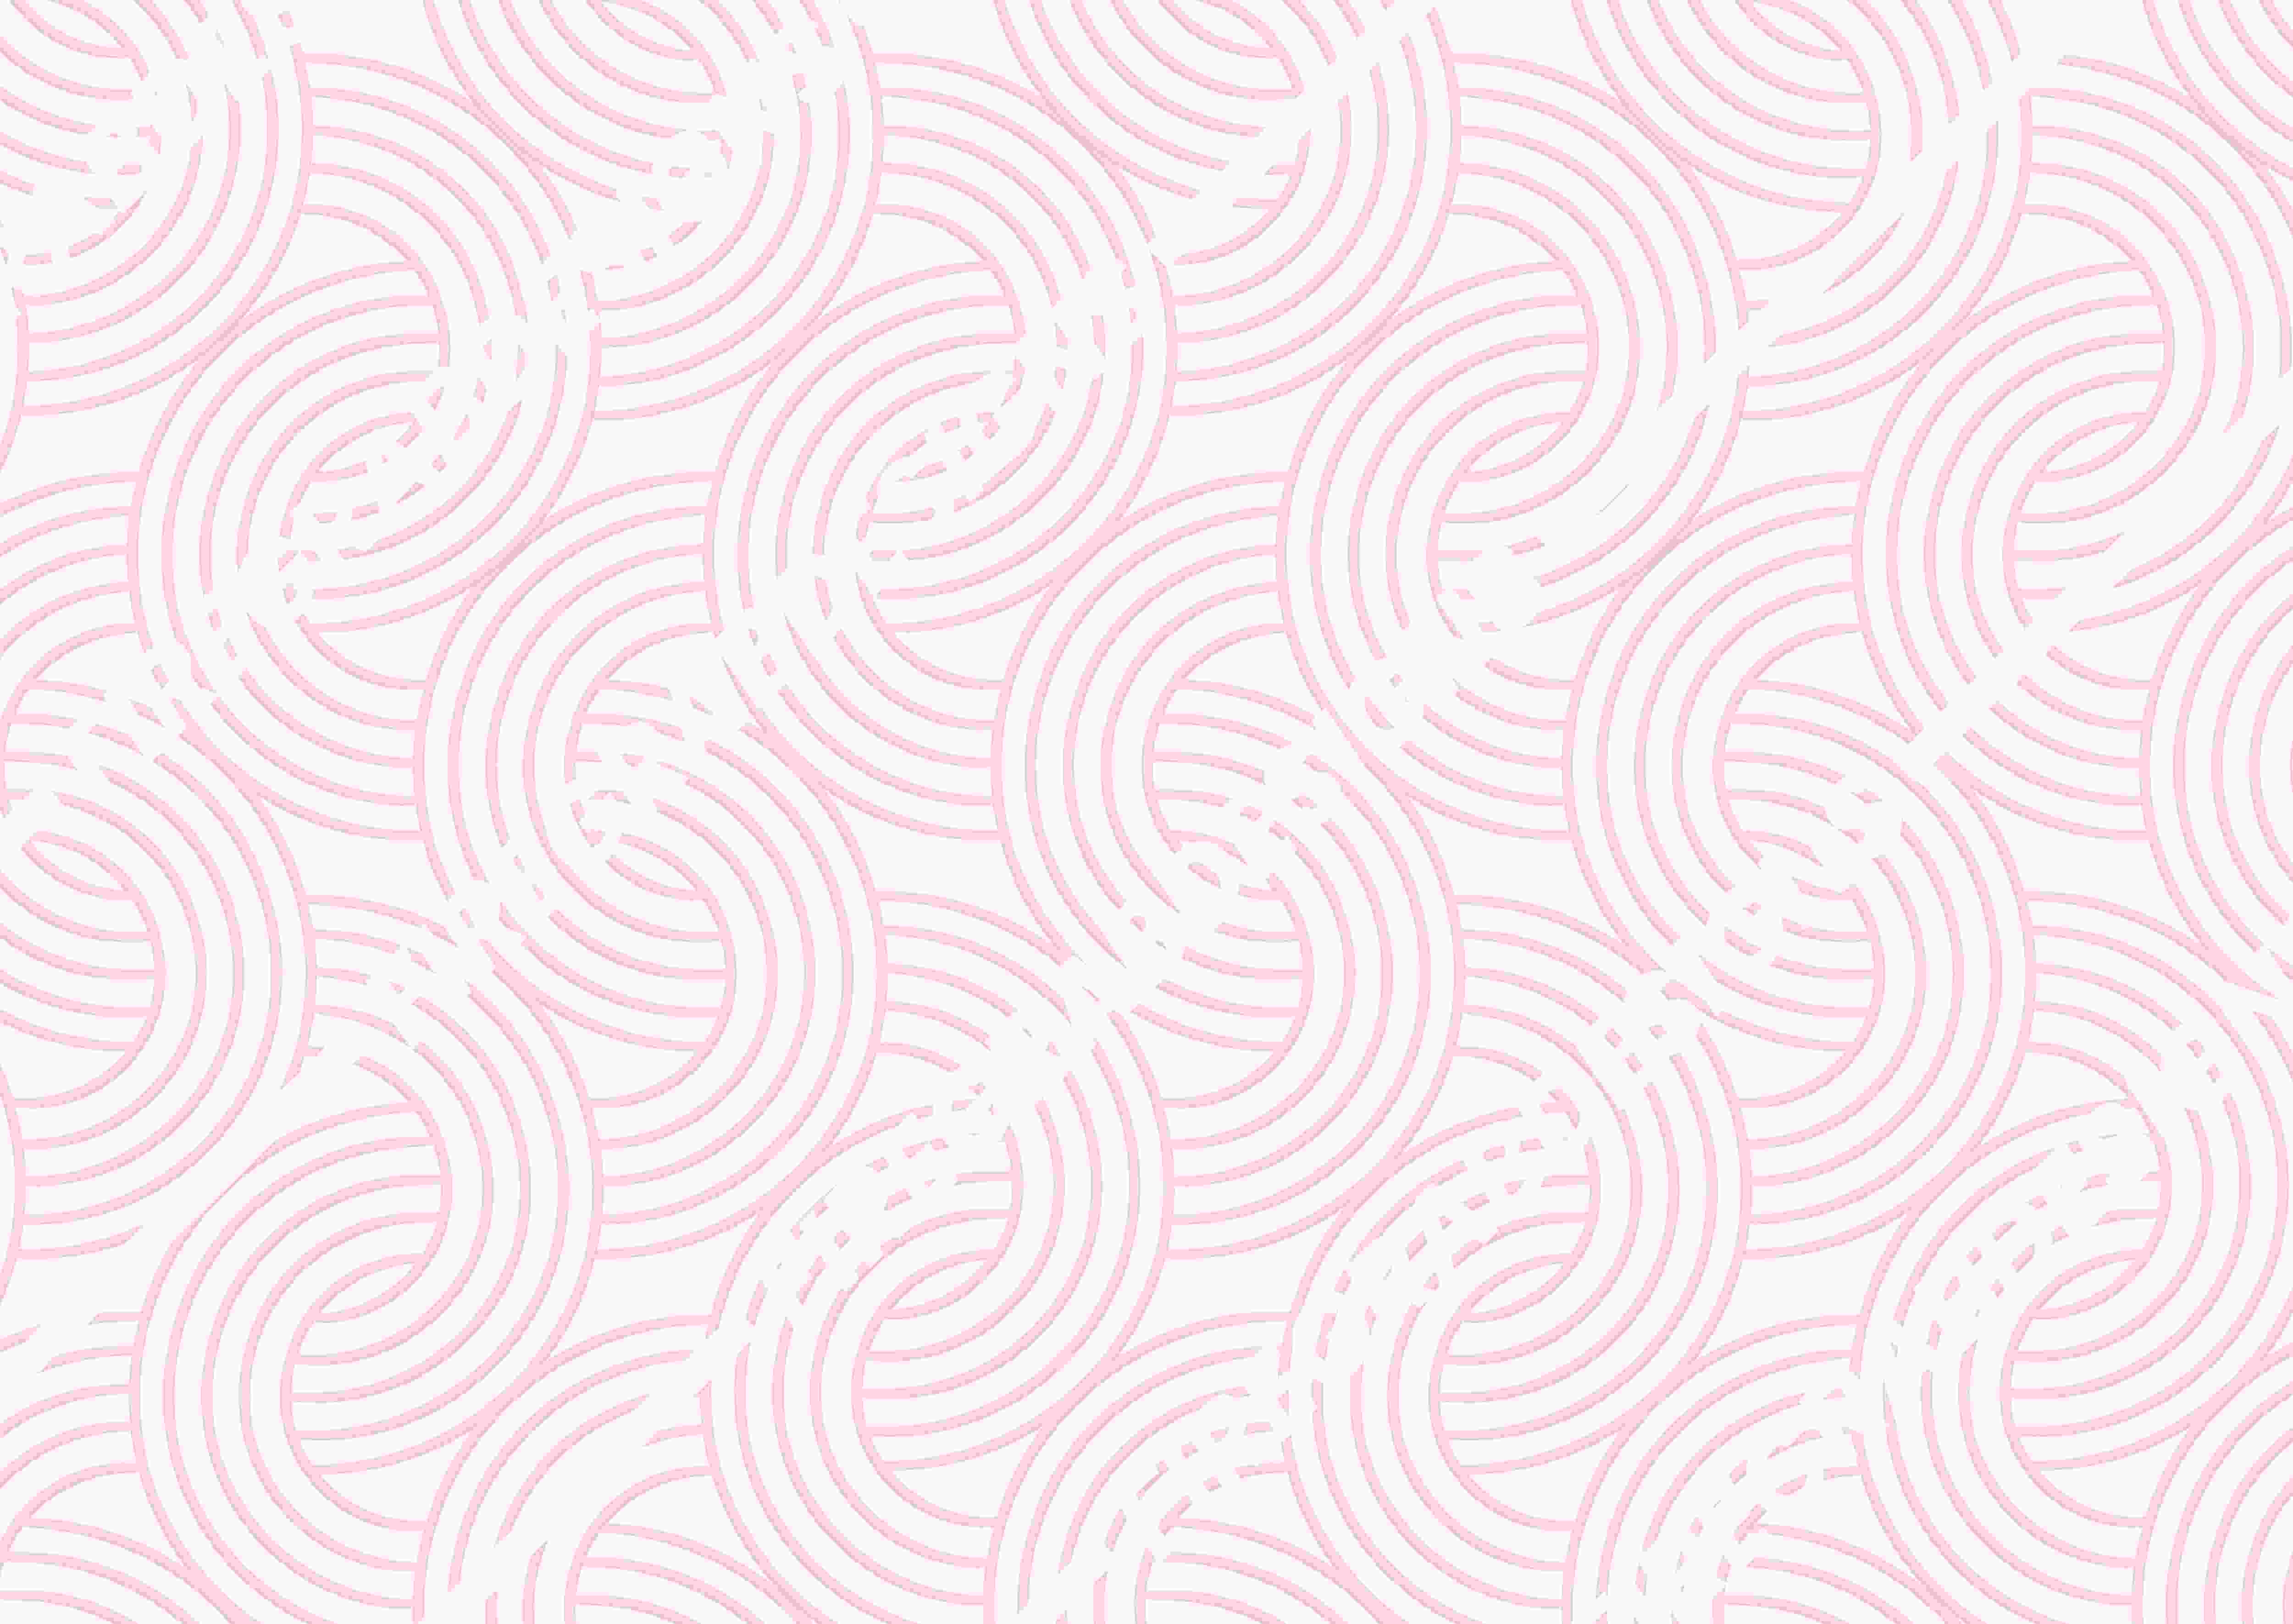 Pink and white background with wavy lines.